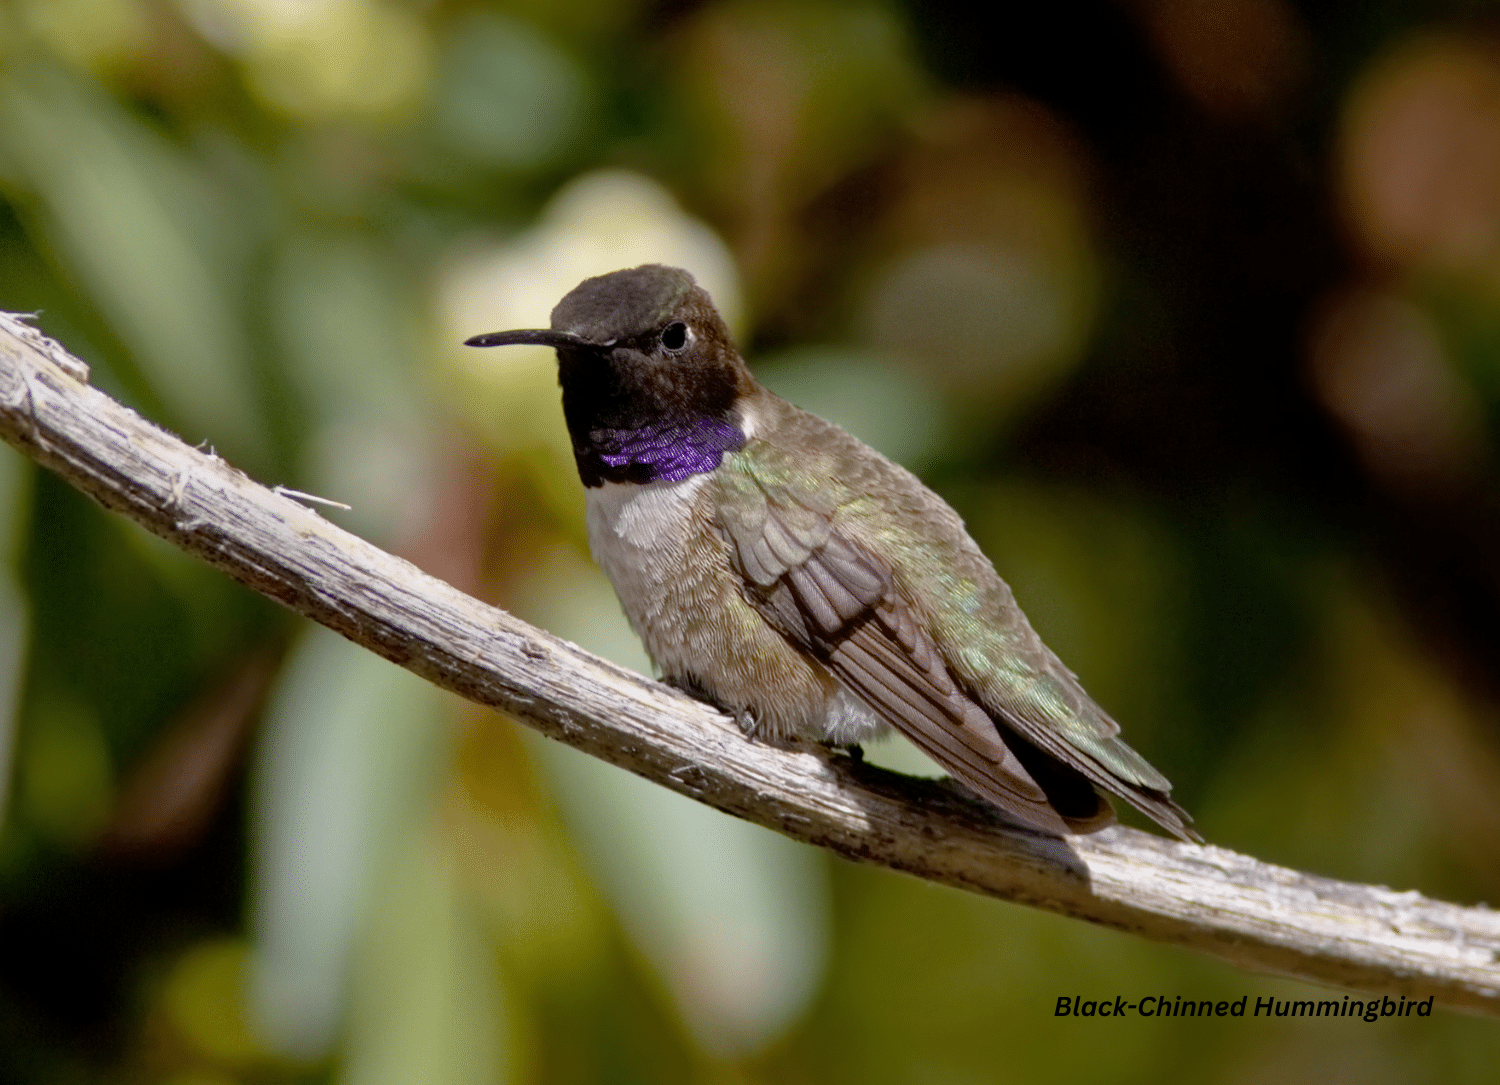 horizontal photo of a Black-Chinned Hummingbird perched on a tree branch